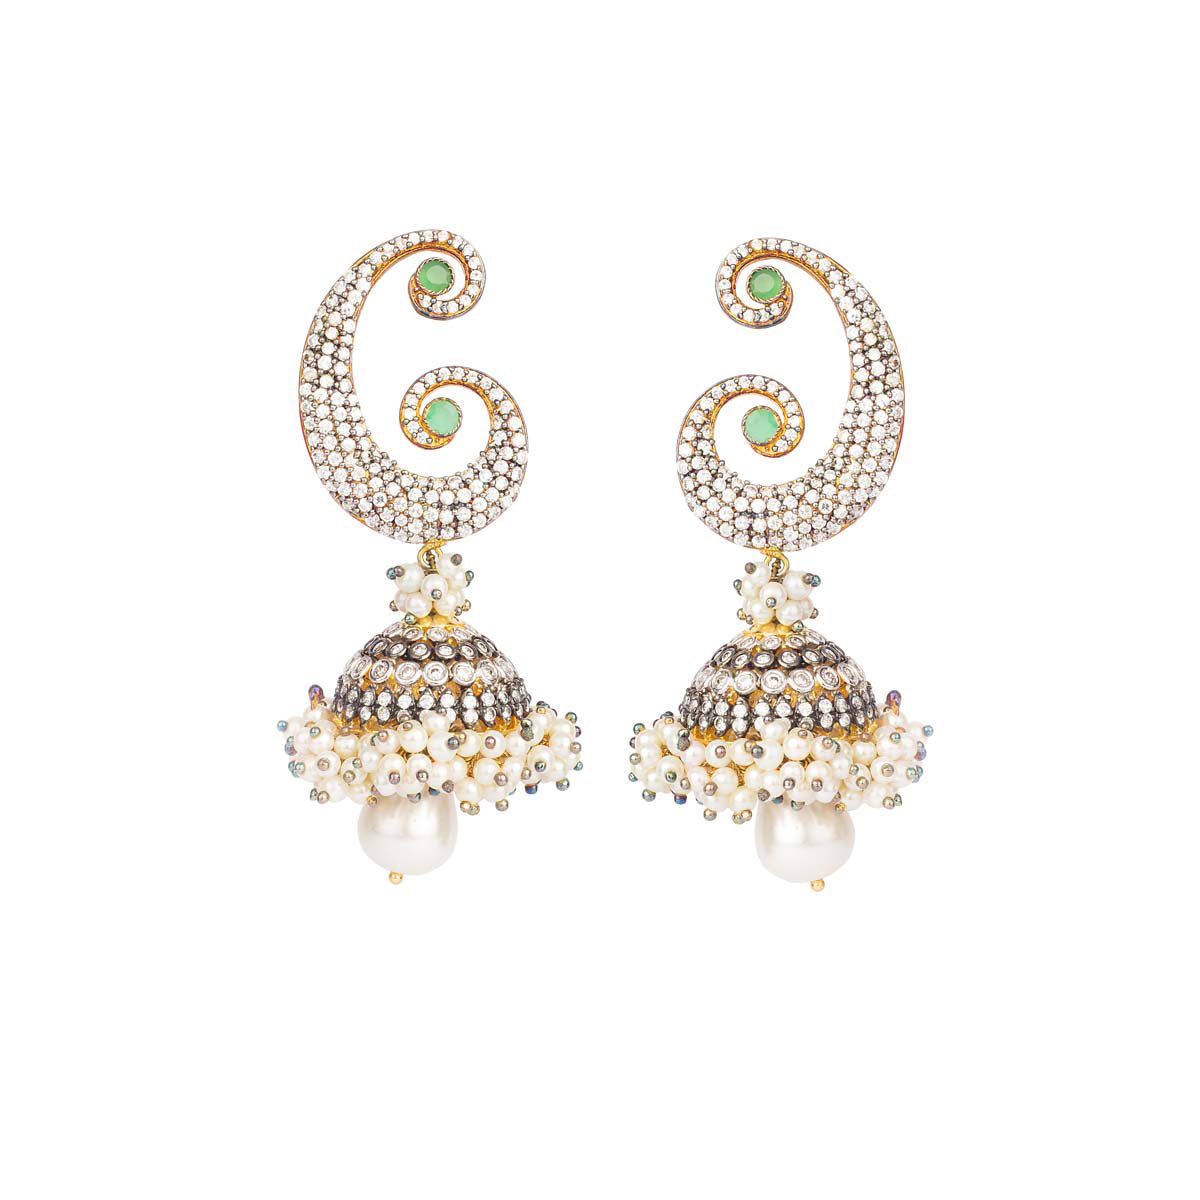 Bridge the beauty of modern and traditional with these antique gold mixed metal alloy earrings made jazzy with pearls and accented mint green studs.